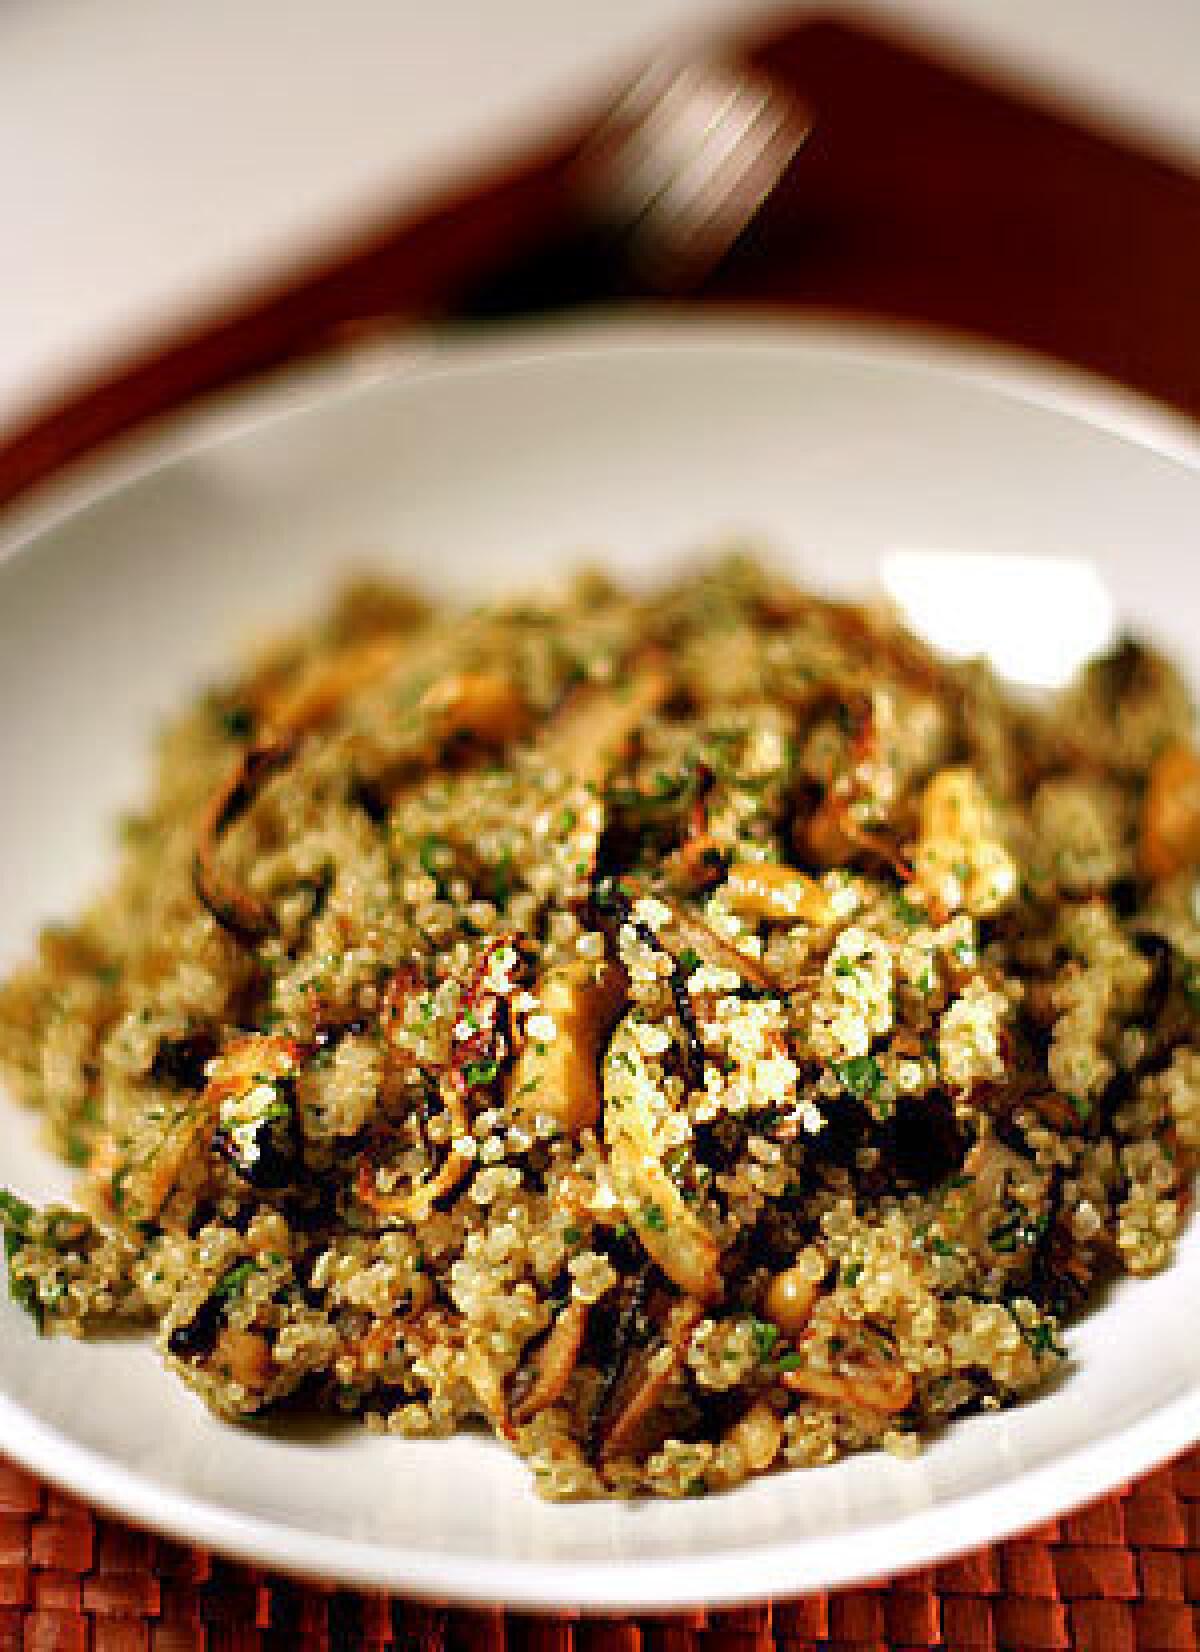 Quinoa salad with shiitakes, fennel and cashews.